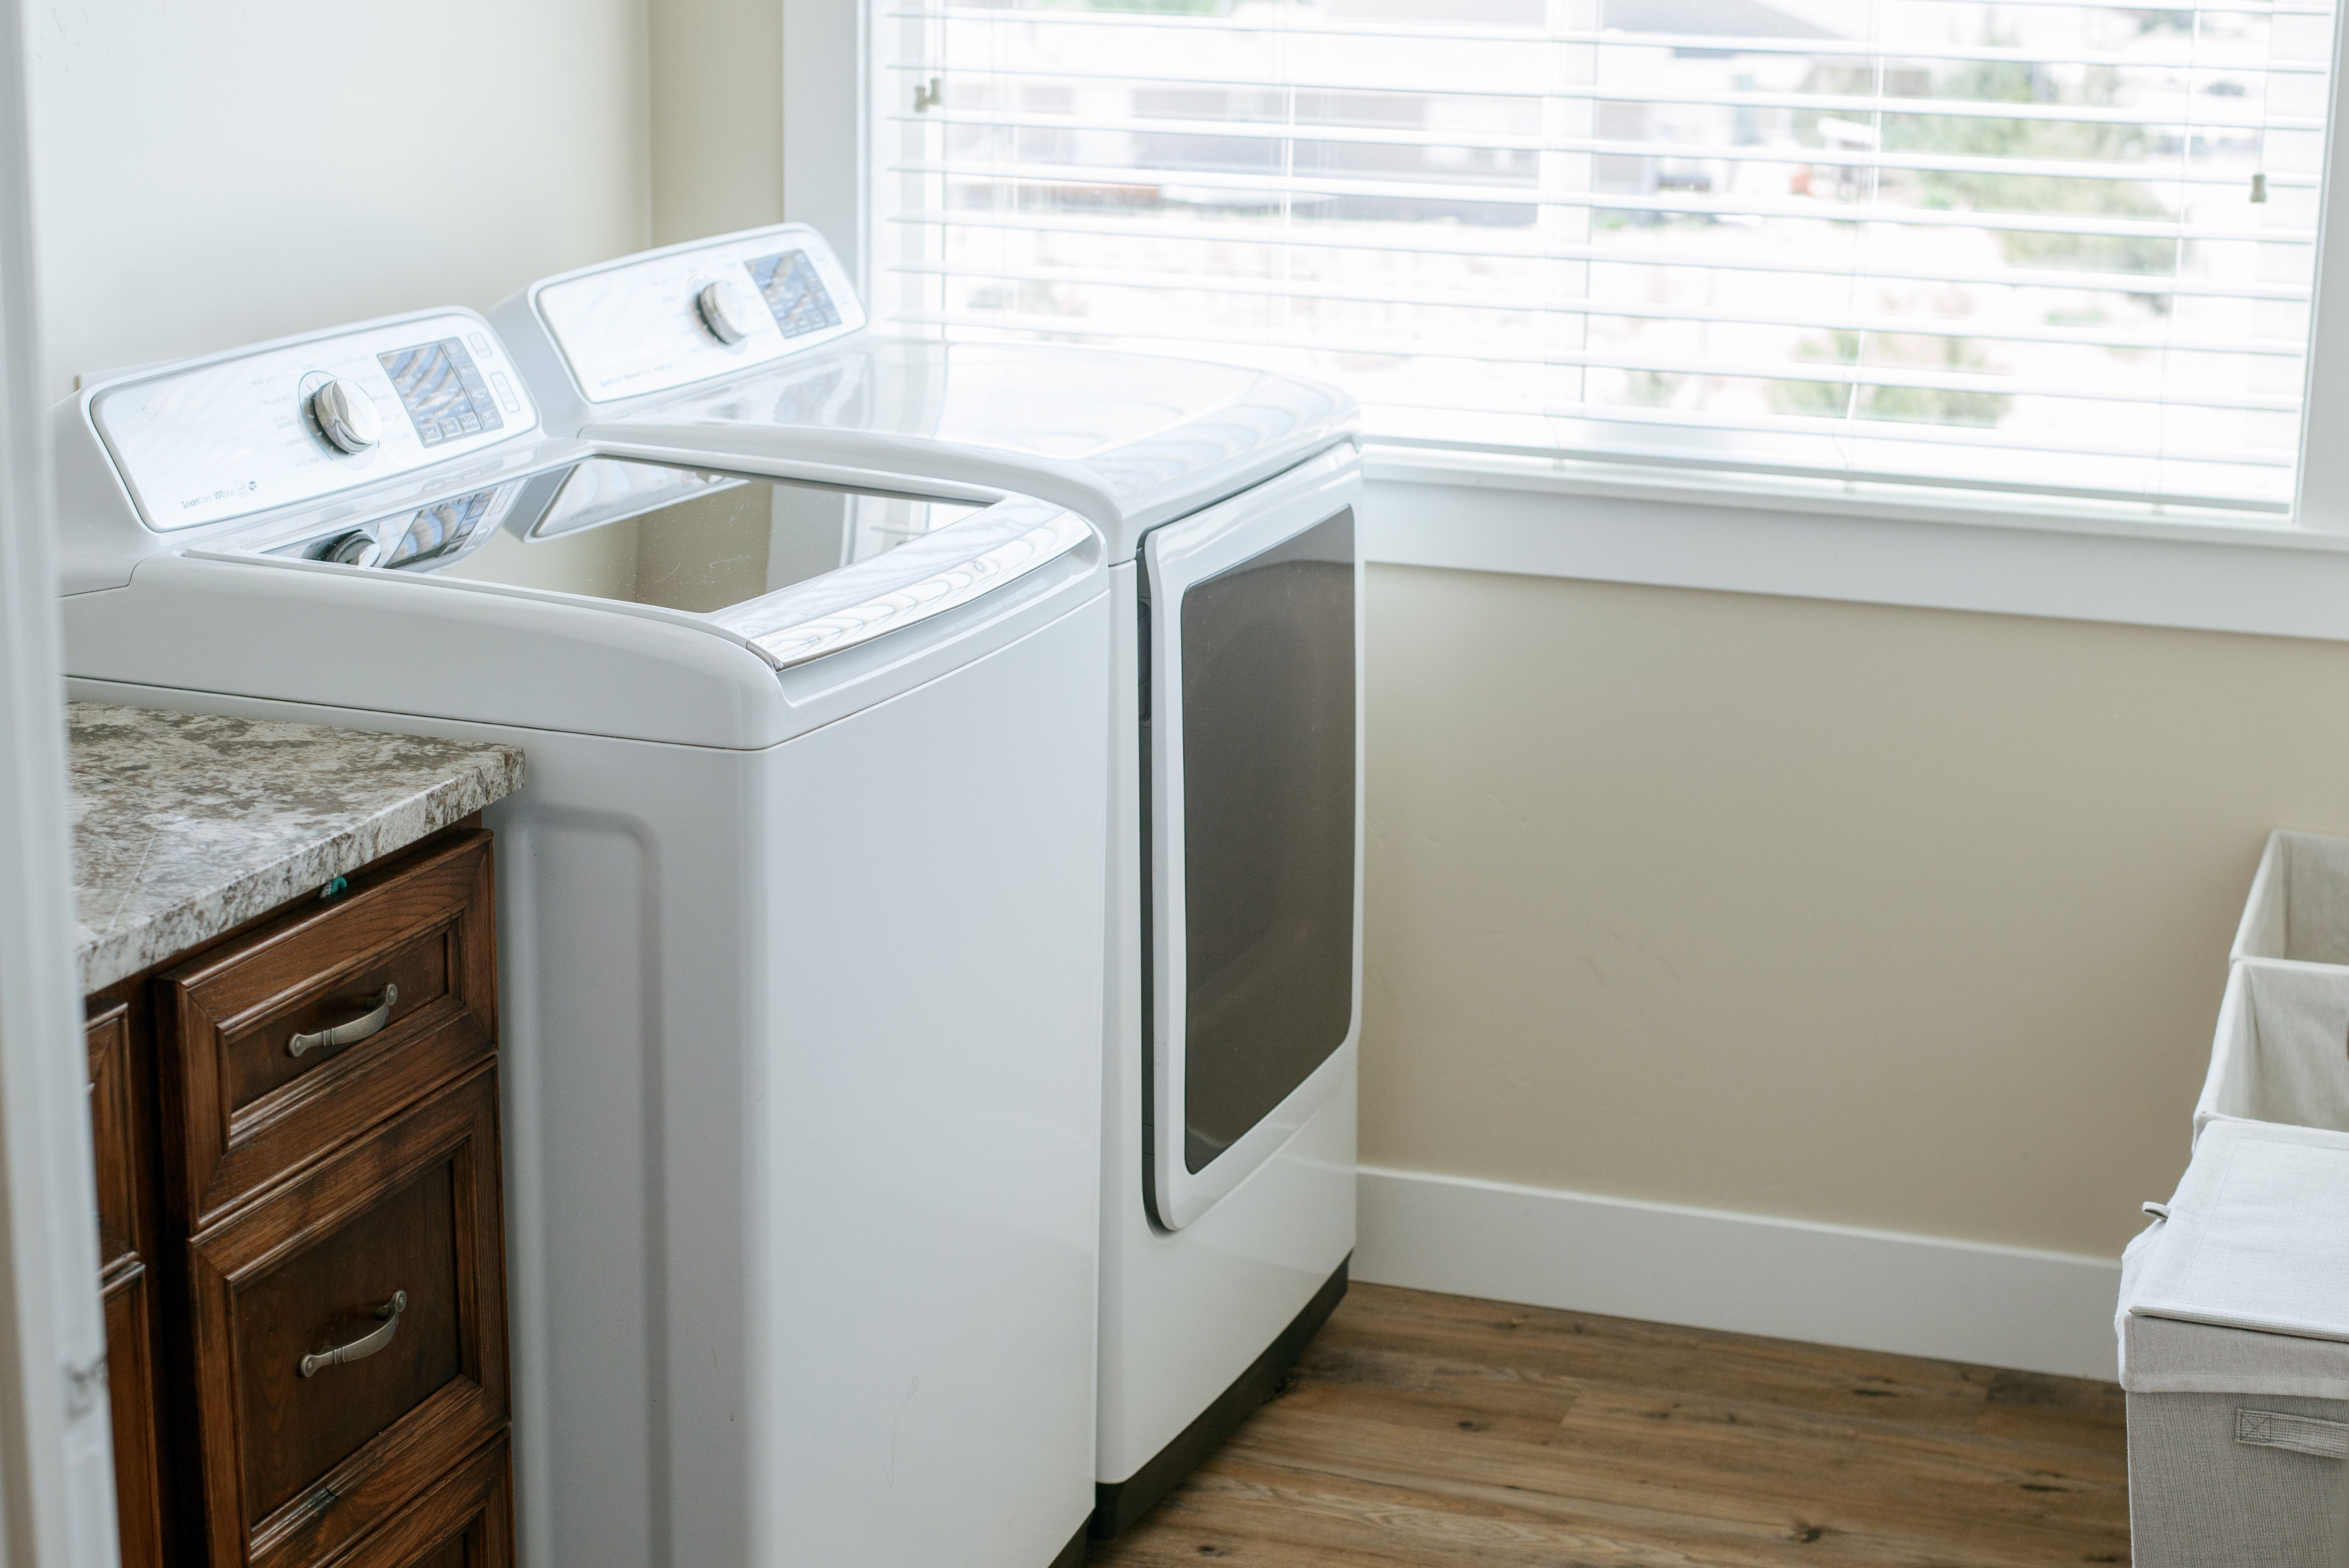 Weve Been Using Our Dryer All Wrong—Heres How